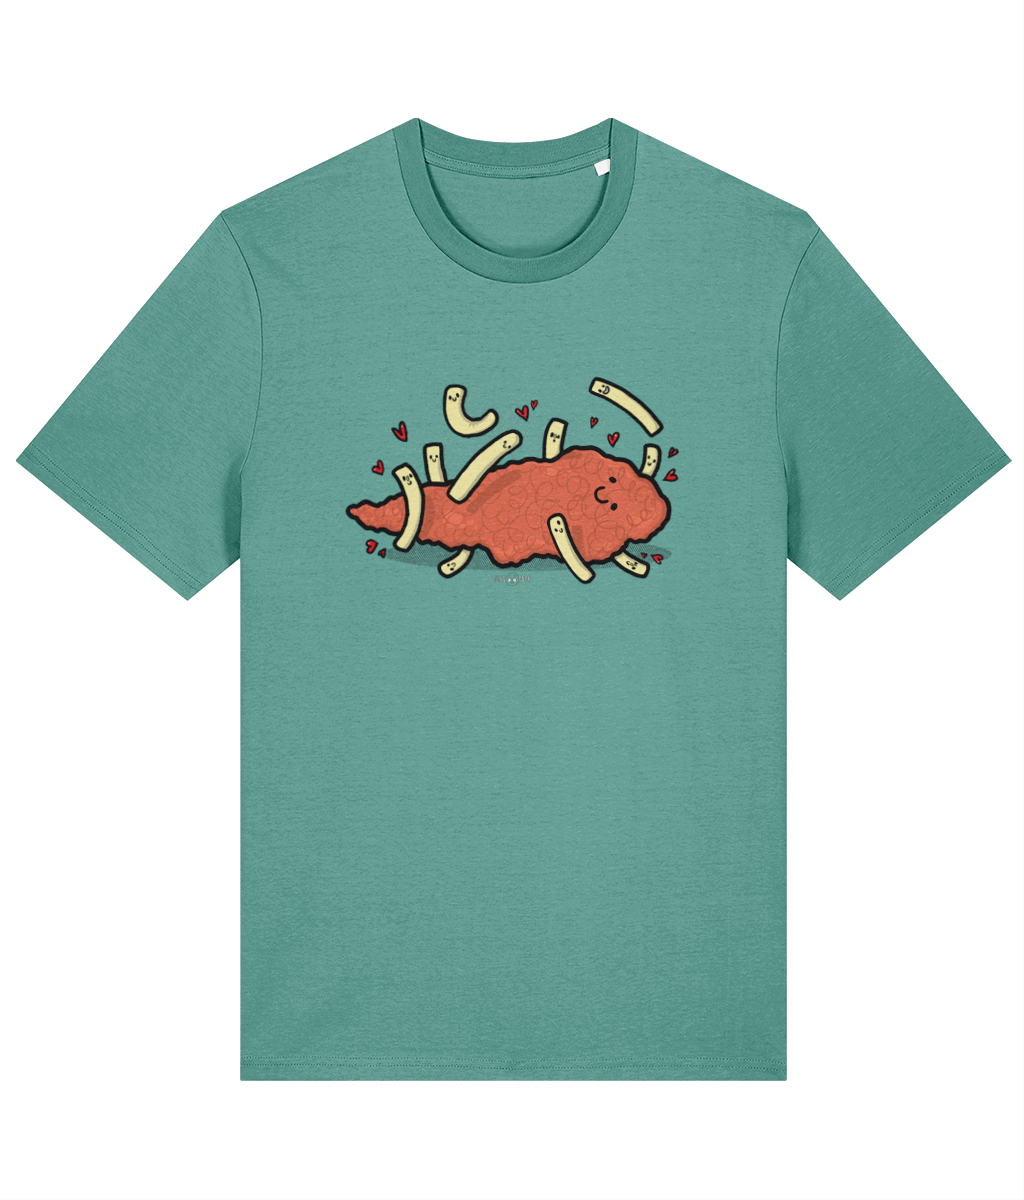 Fish Loves Chips - Tussface T-shirt